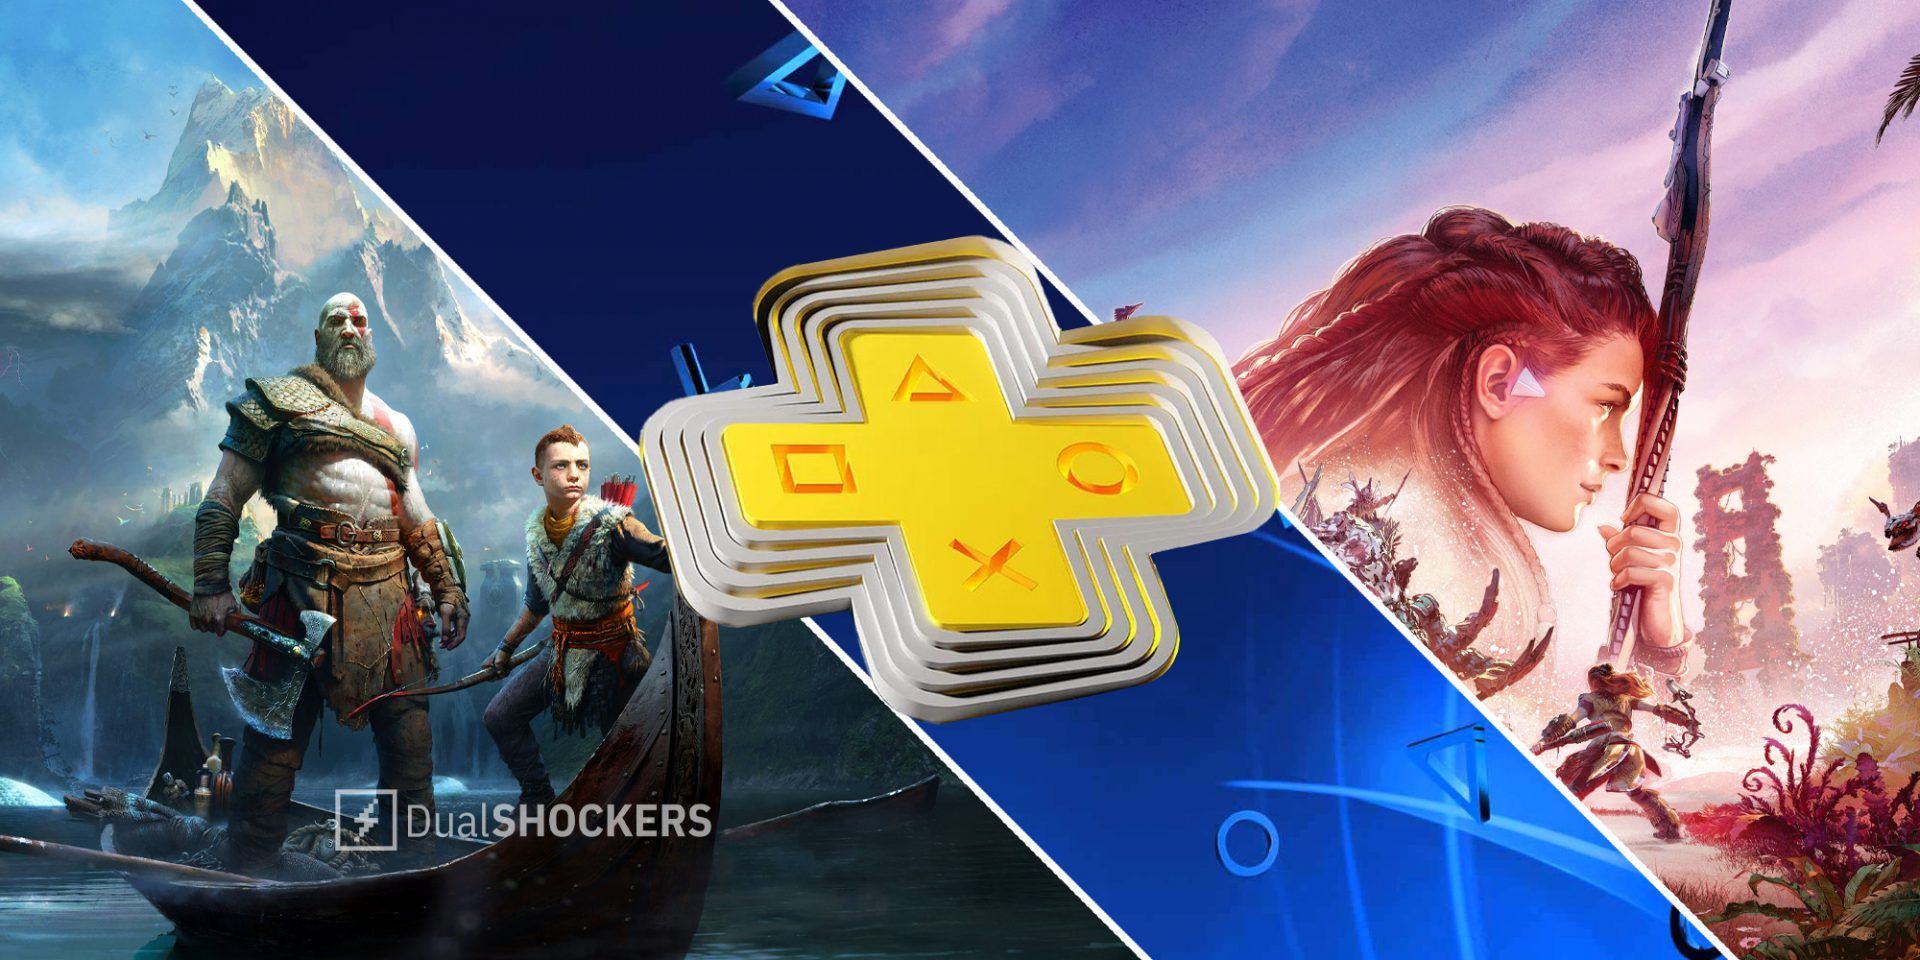 God of War Kratos and Atreus in a boat on left, PS Plus logo with Playstation background in middle, Horizon Forbidden West Aloy with weapon and fighting on right